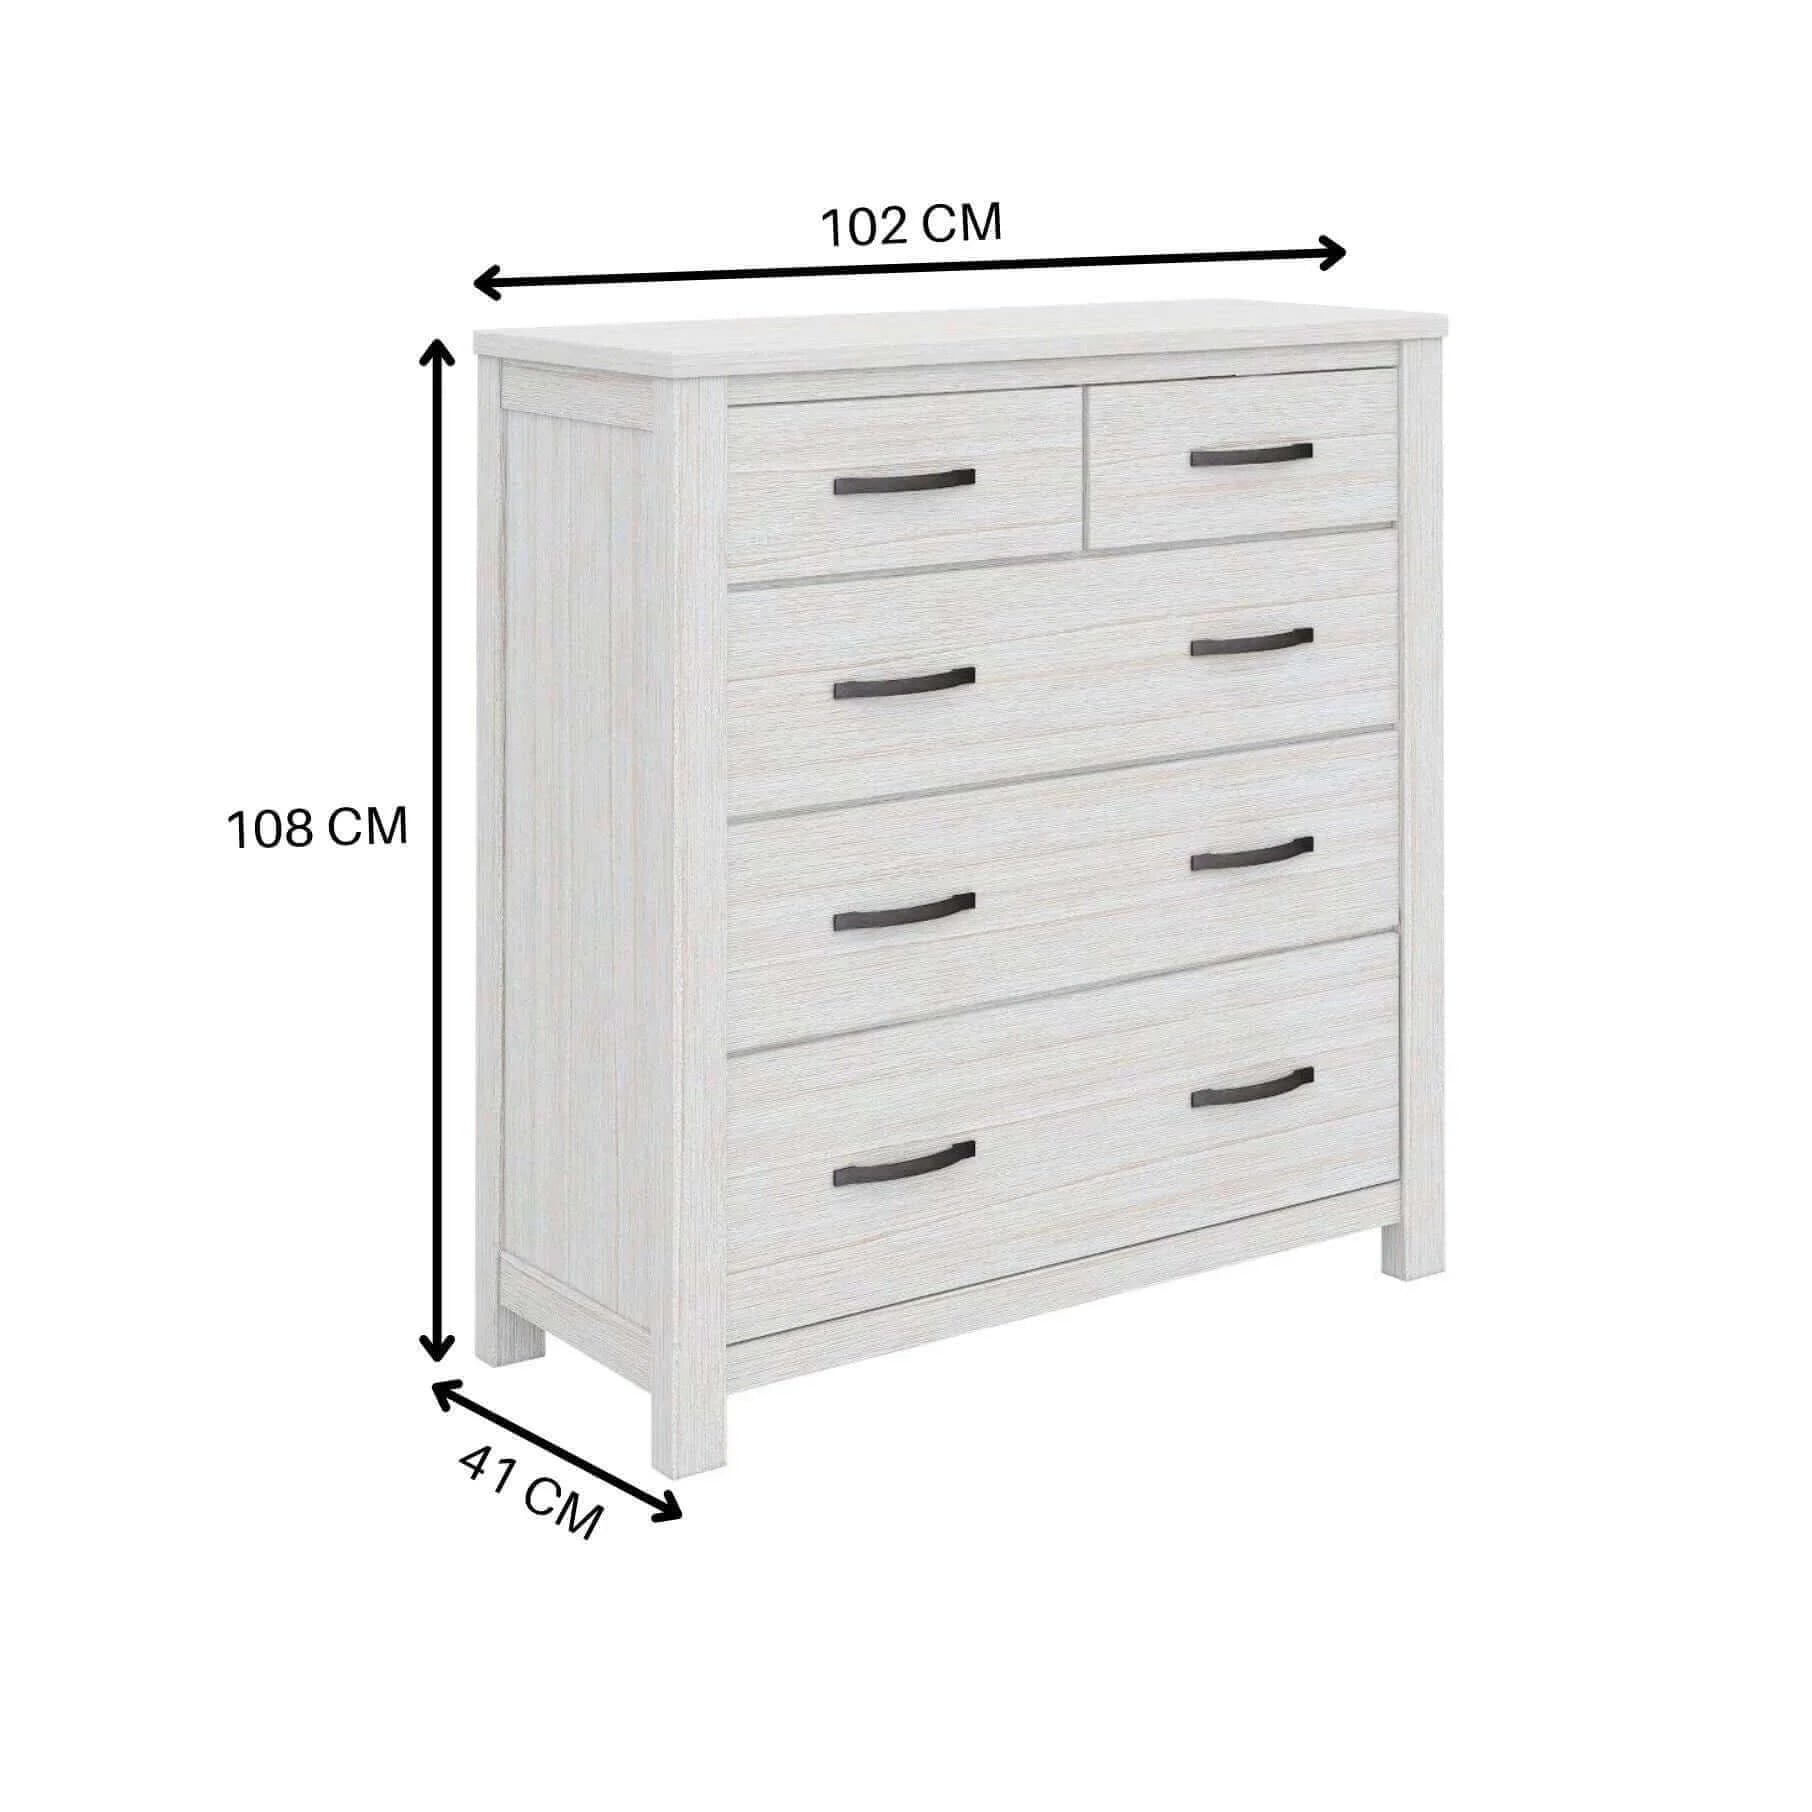 Foxglove Tallboy 5 Chest of Drawers Solid Ash Wood Bed Storage Cabinet - White-Upinteriors